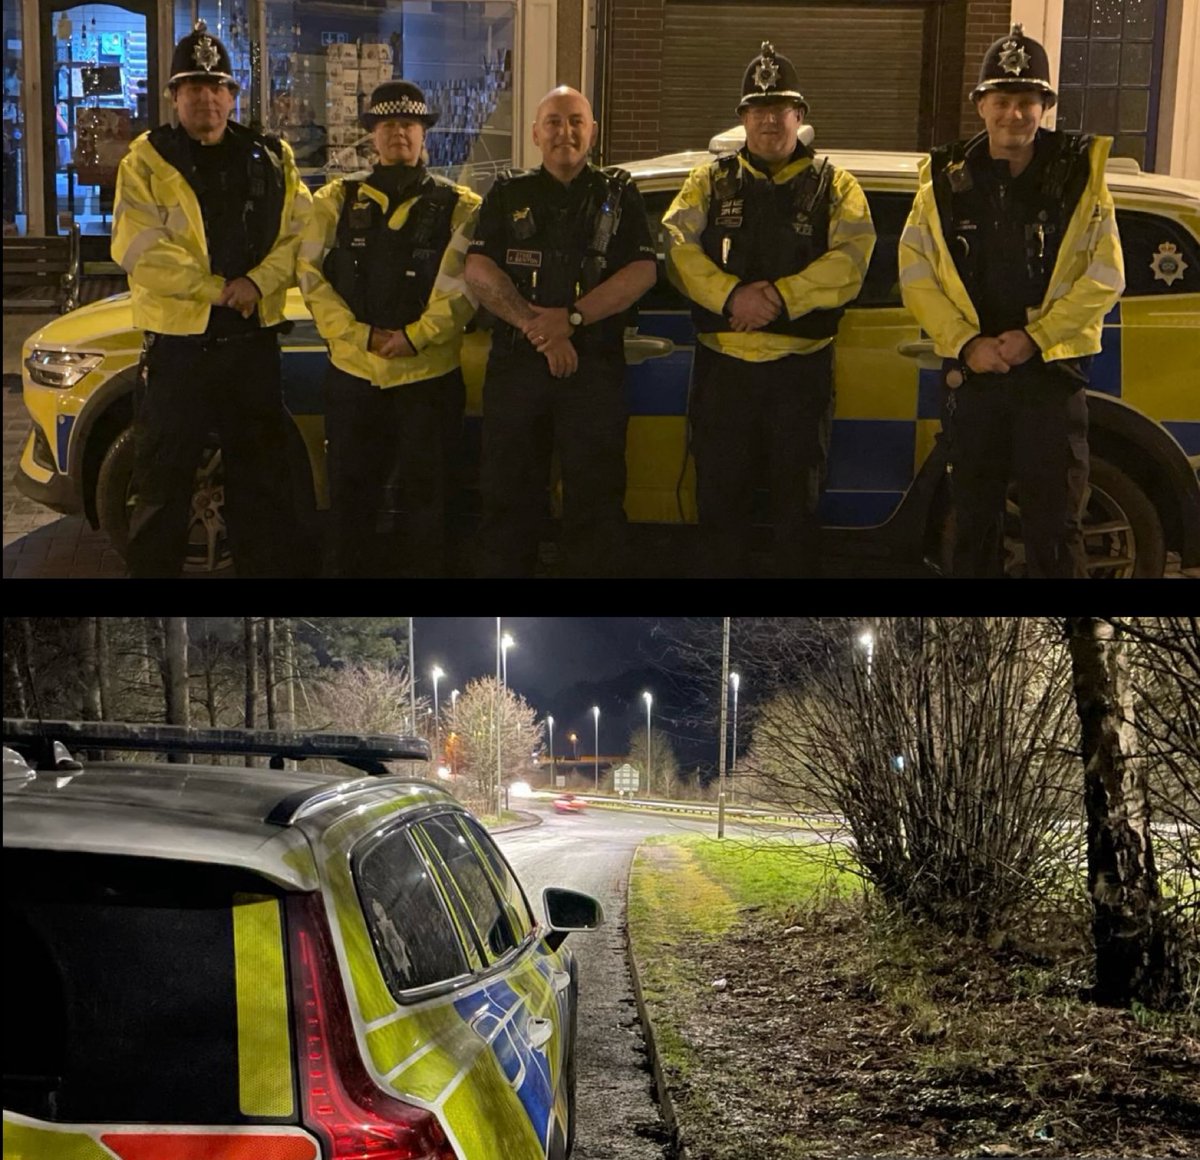 7 SC’s were out on Friday evening supporting the @PoliceStafford team. Various incidents attended including public order, high visibility patrols on the M6 services and policing of the A34 in Trentham following reports of illegal street racing